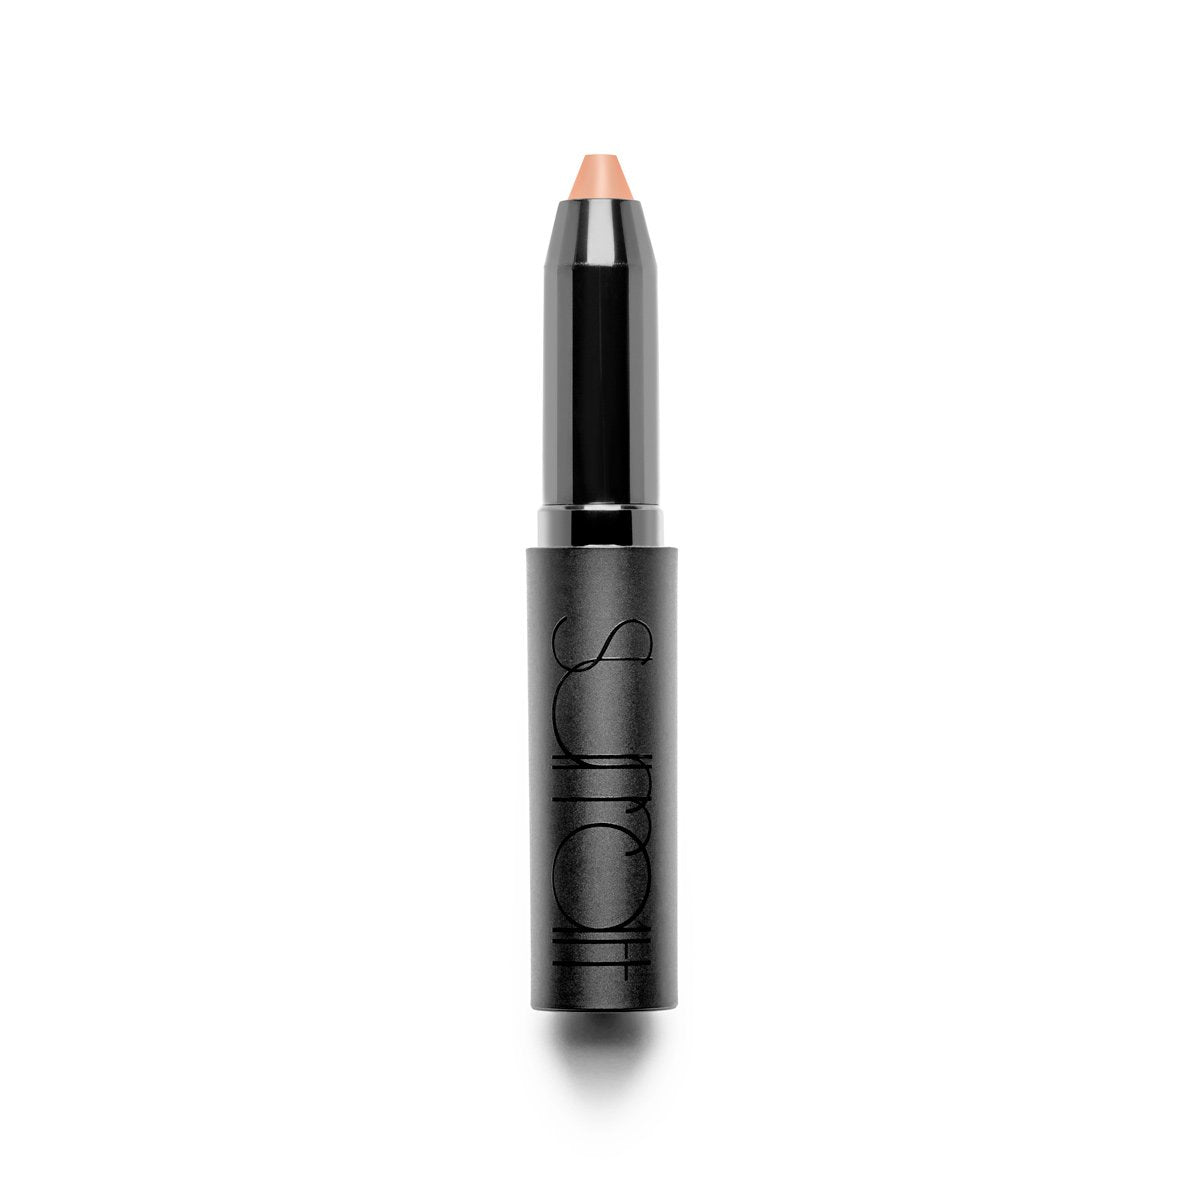 IN THE FLESH - Peachy Beige - long-wearing matte finish lipstick in peachy shade